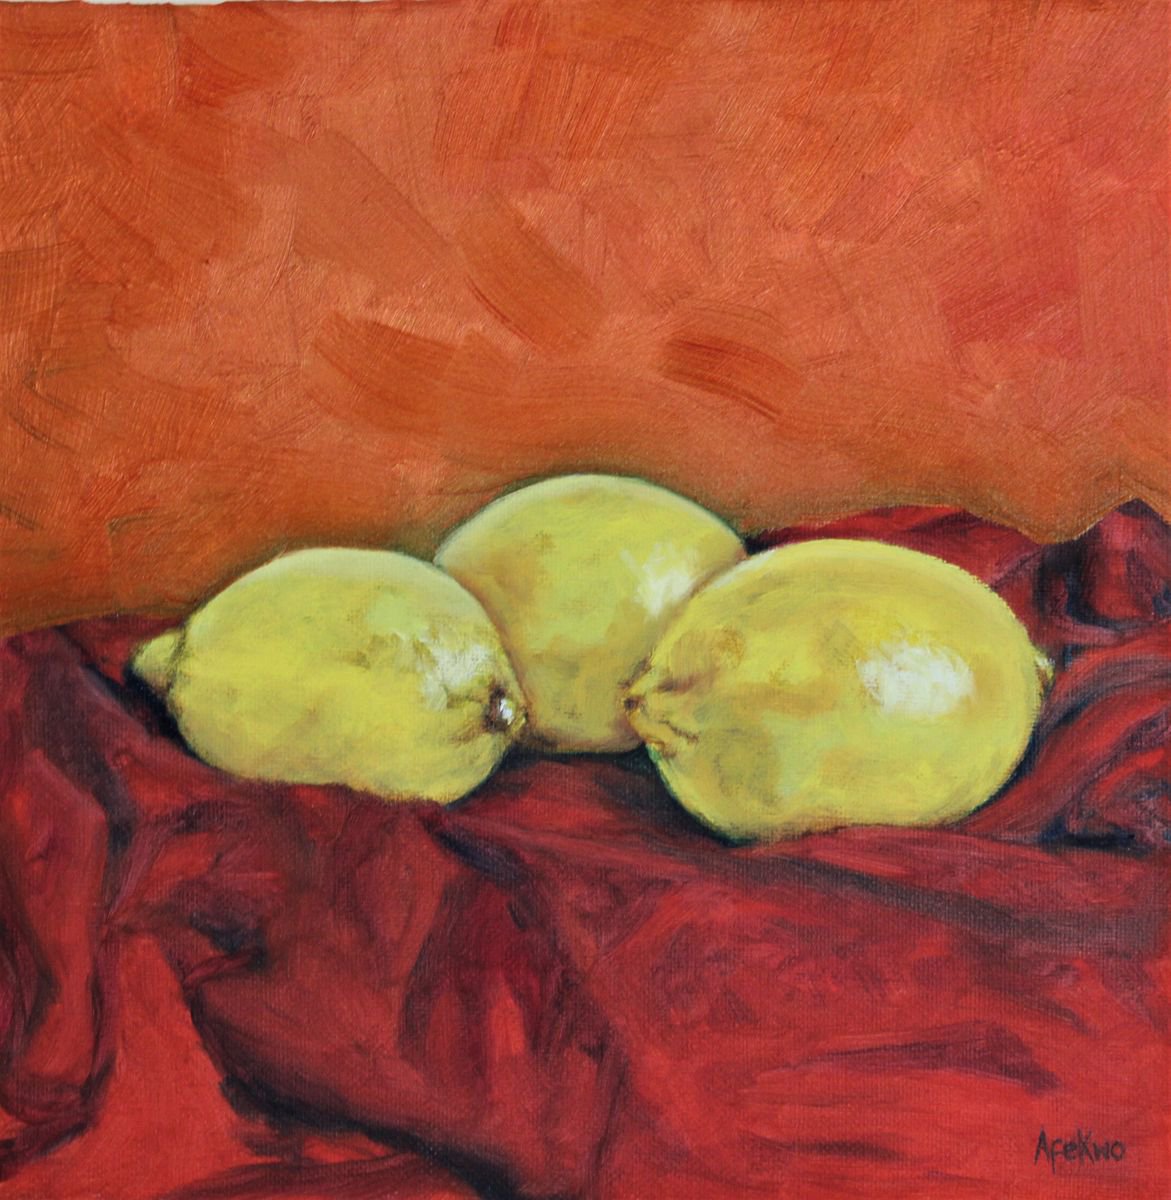 Lemons on red cloth still life by Afekwo